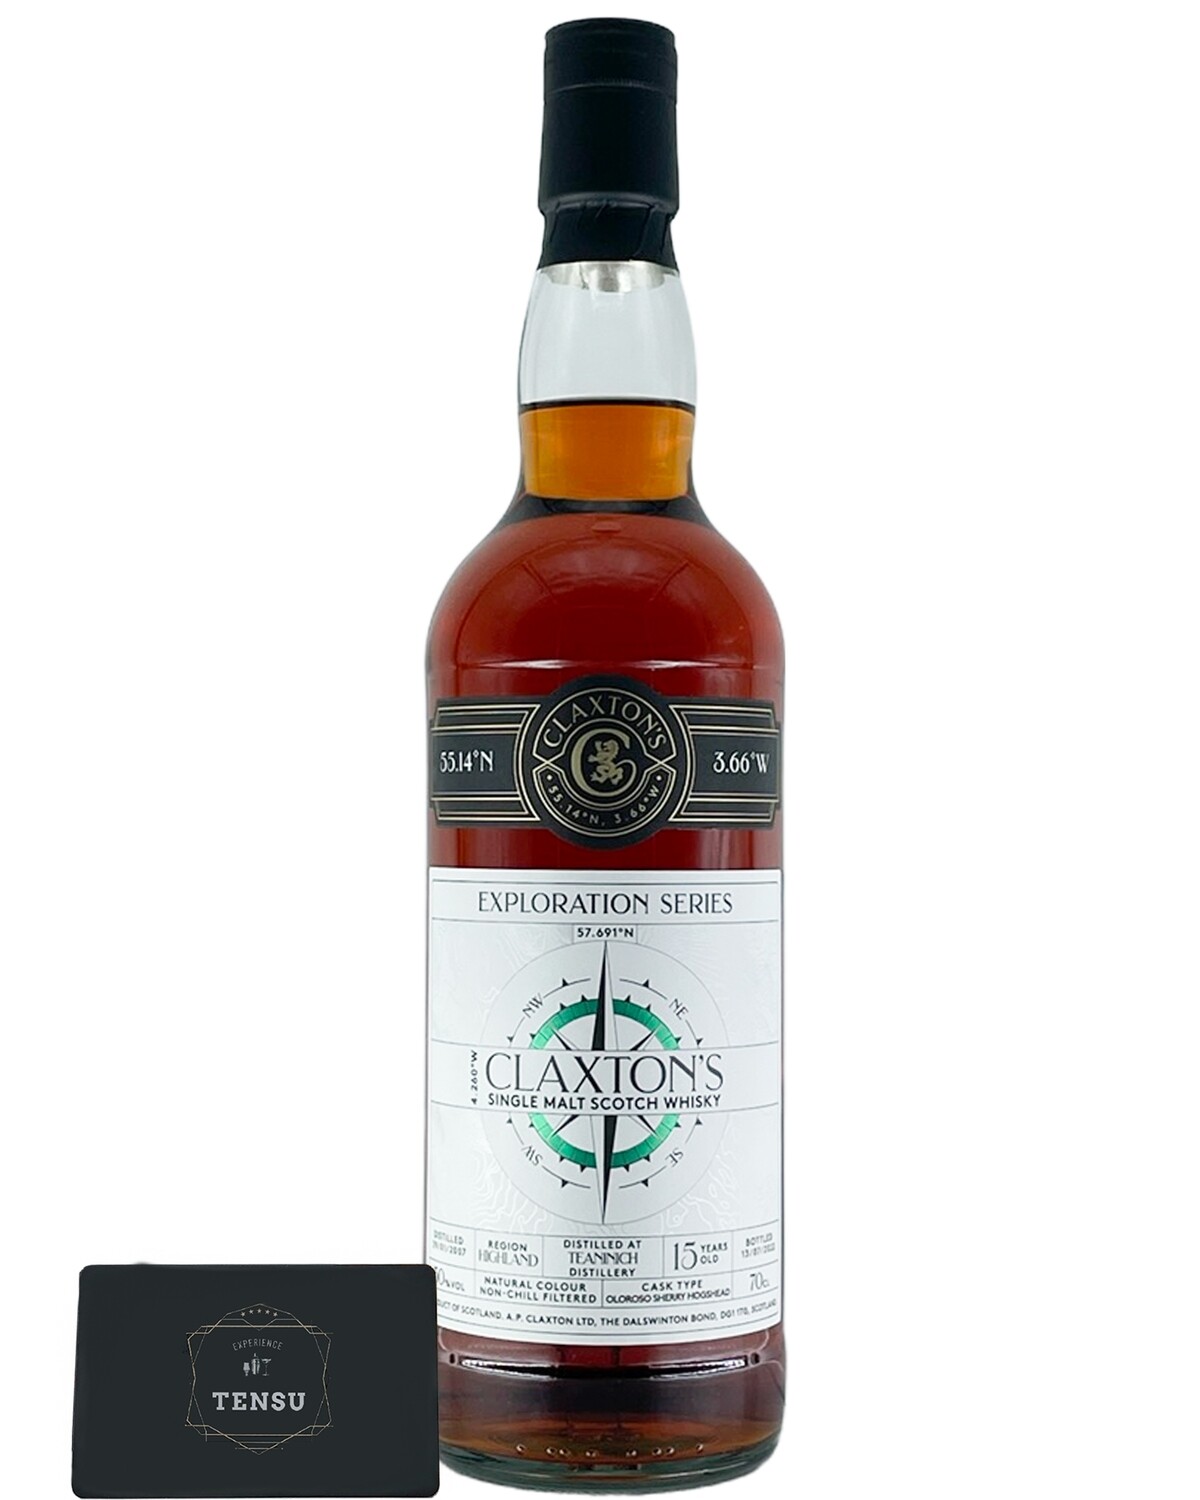 Teaninich 15Y - Exploration Series (2007-2022) Oloroso Sherry Cask 50.0 "Claxton's"